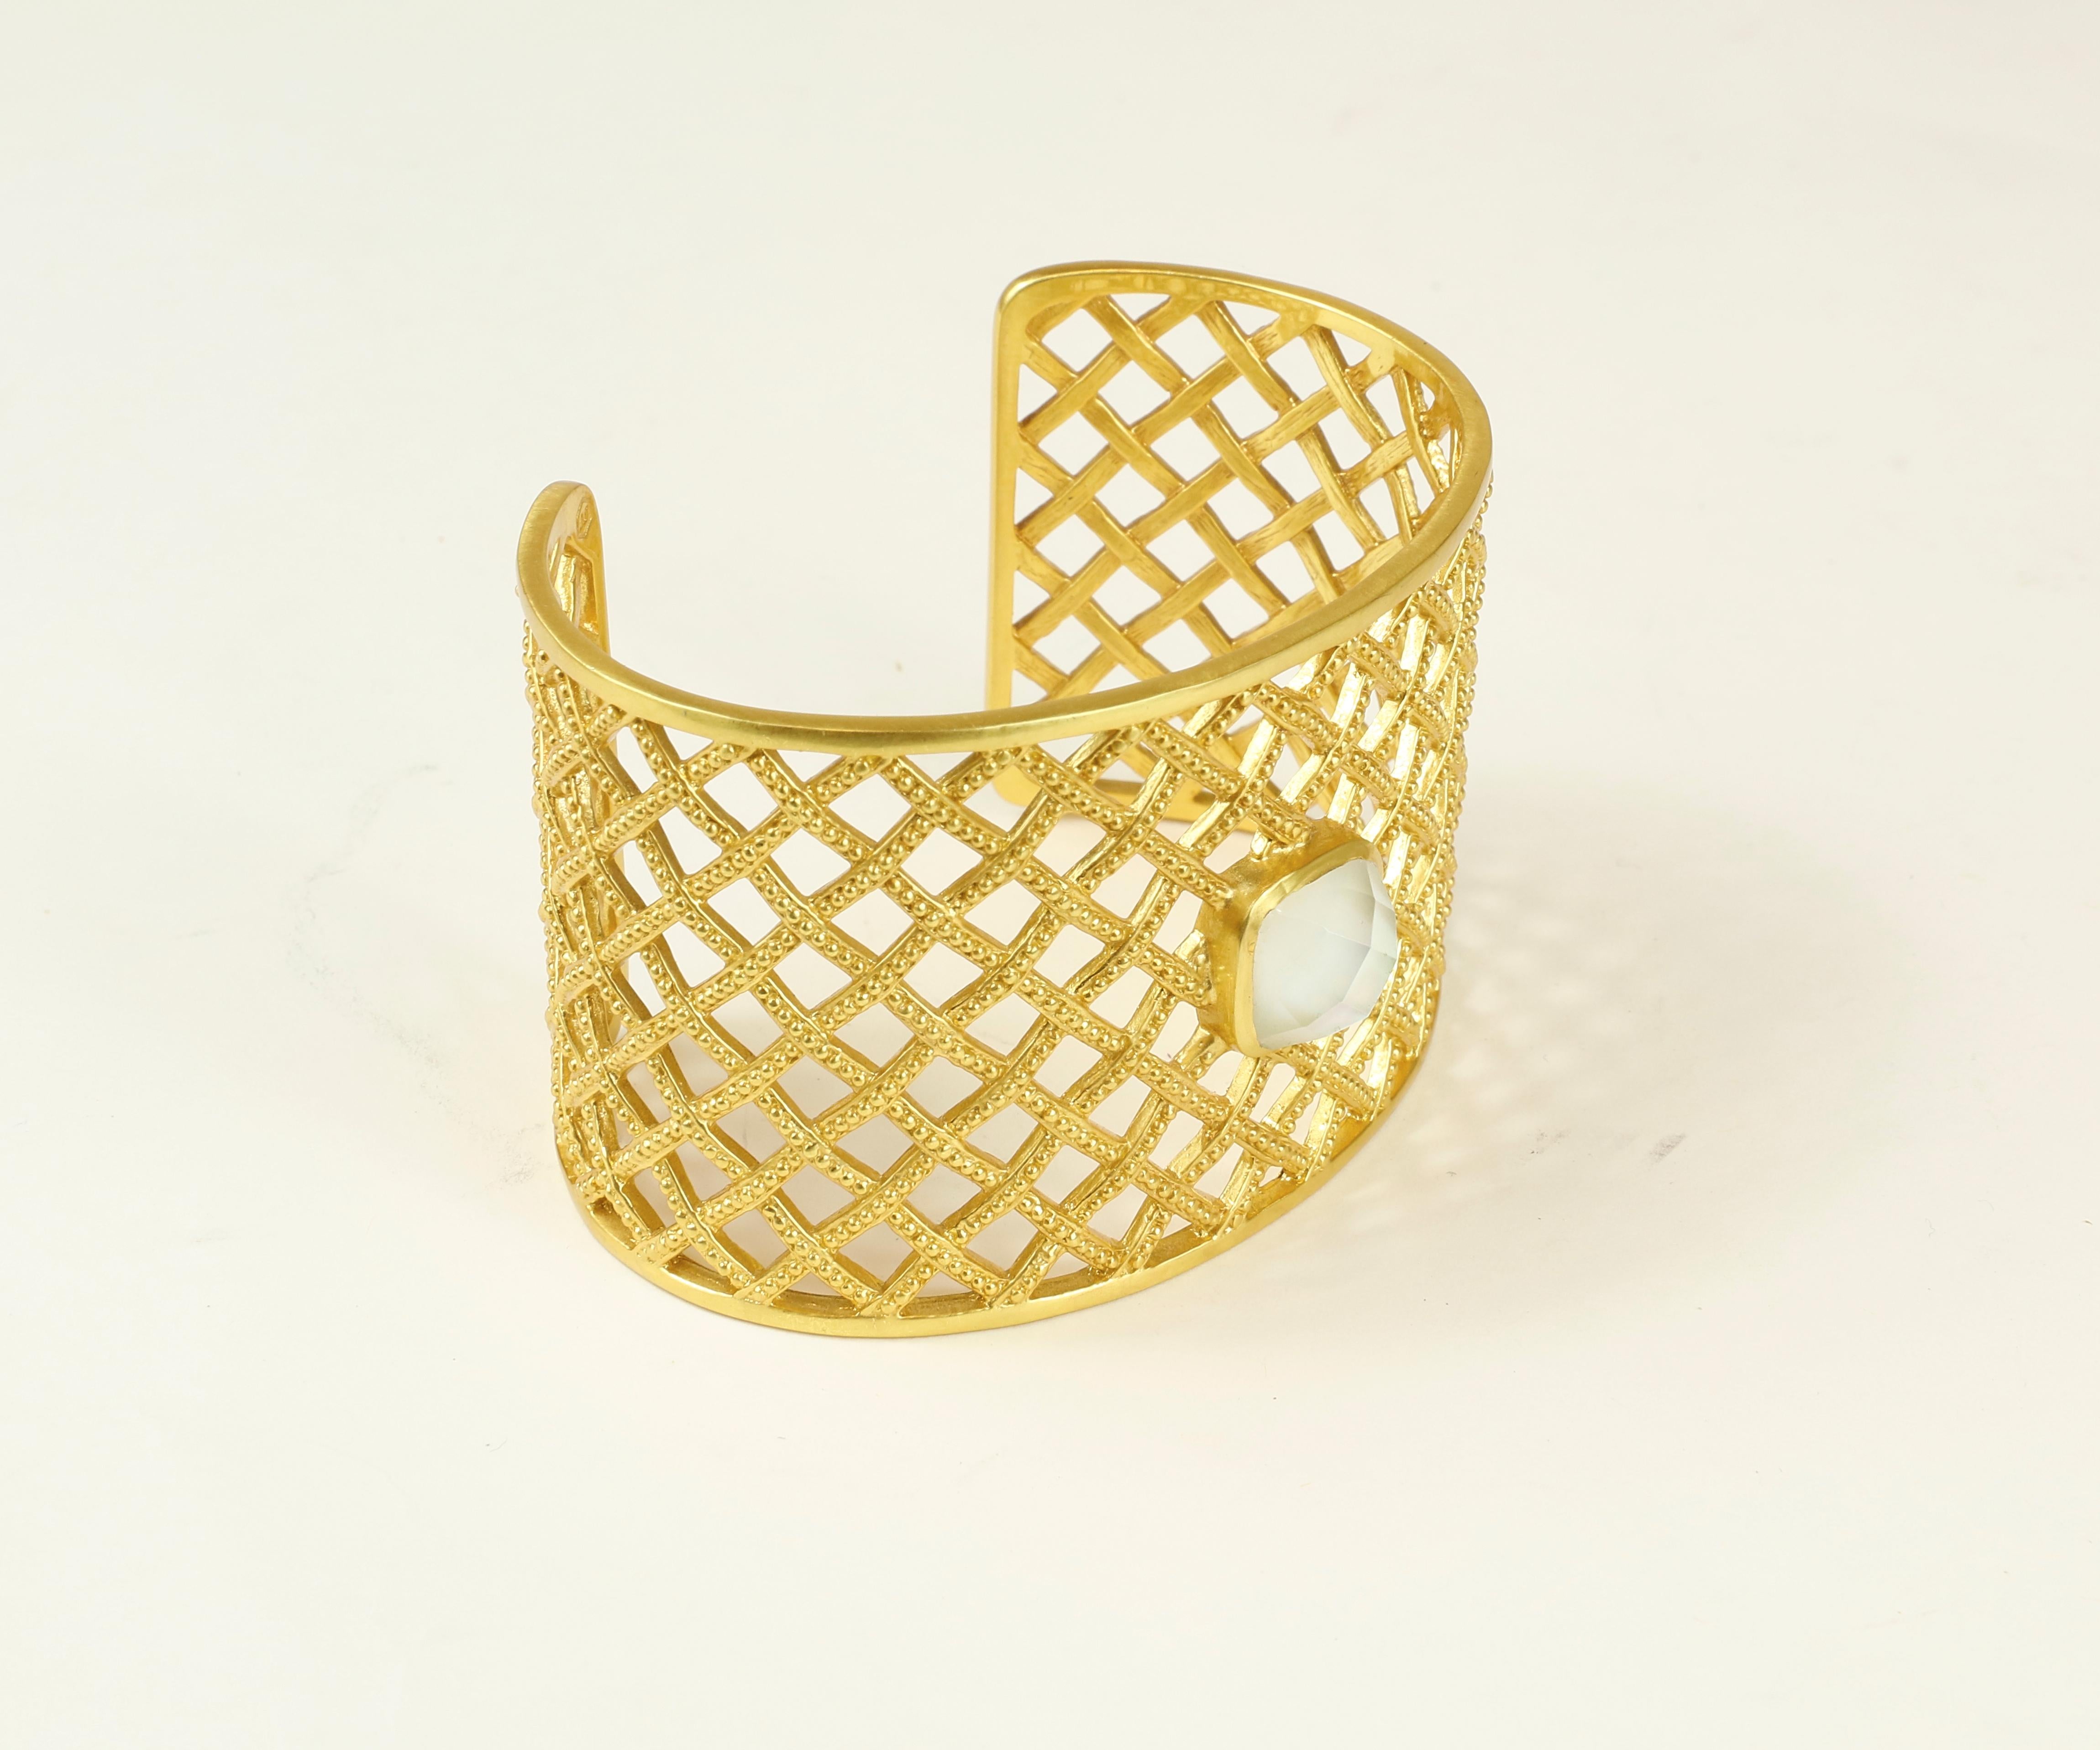 Women's Julie Vos Loire Cuff Gold Bracelet with Clear Crystal